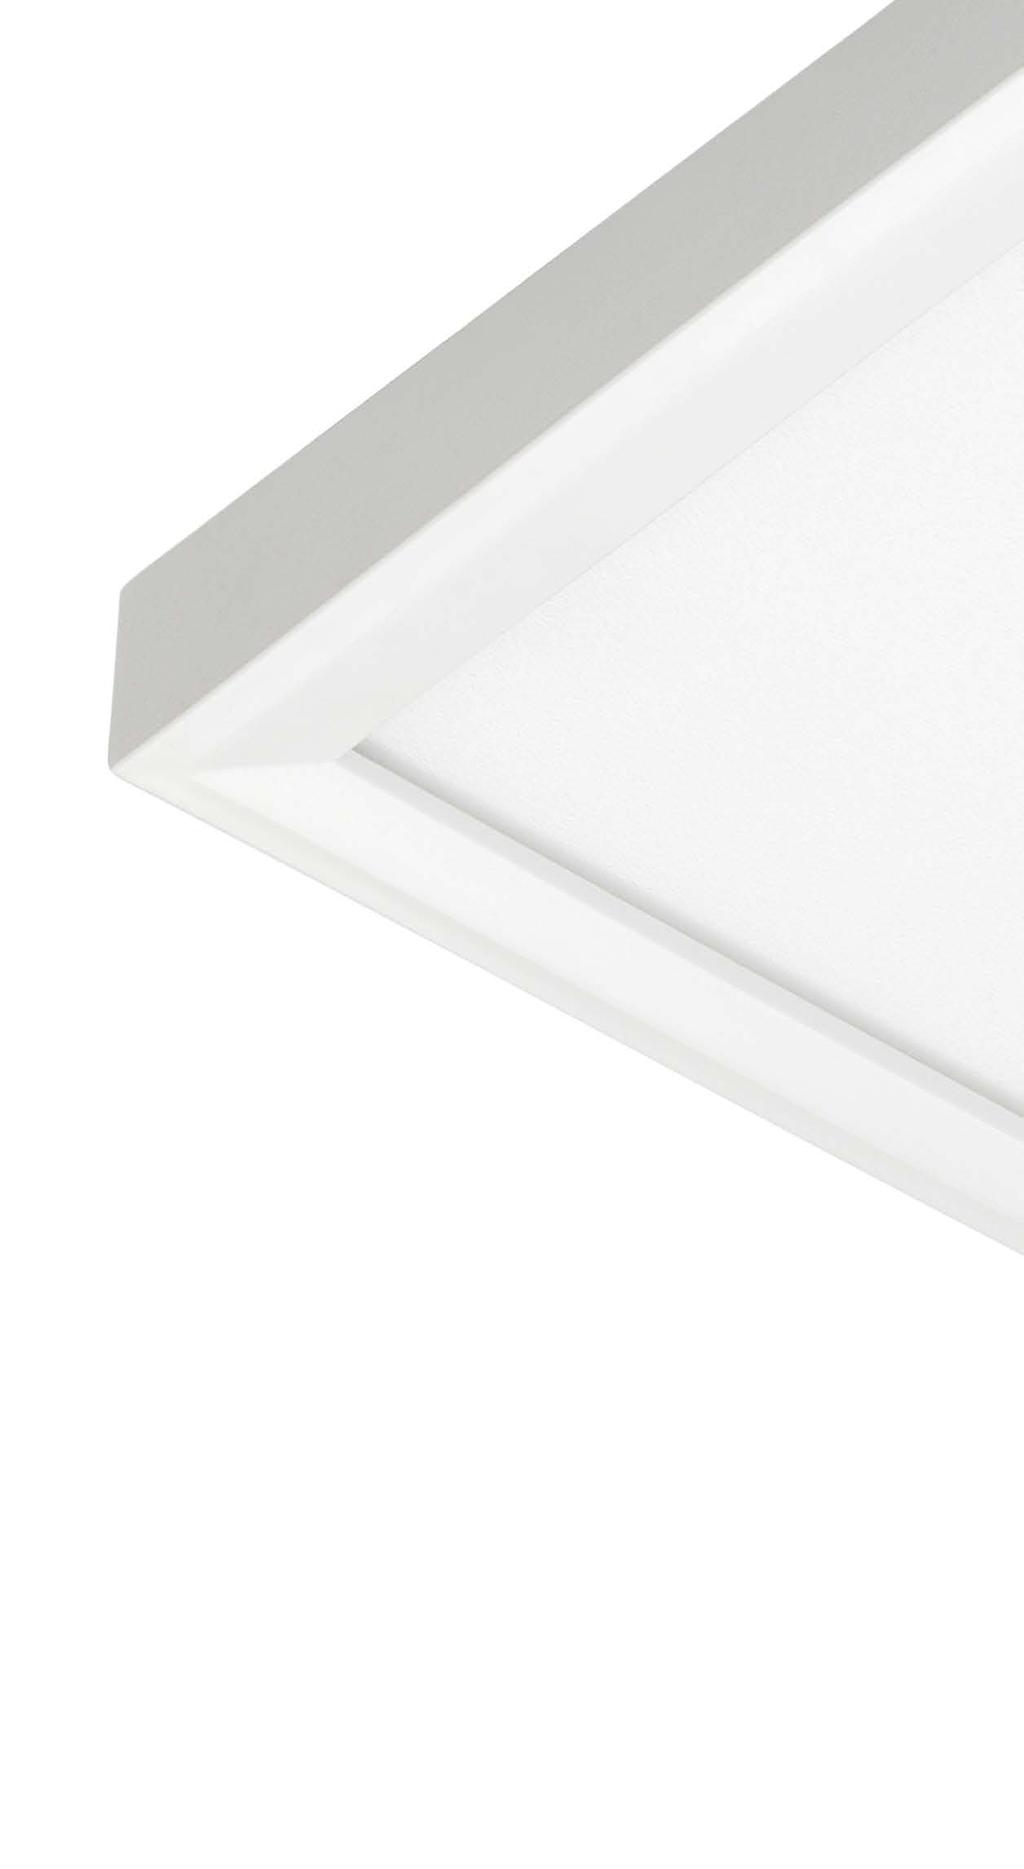 The low cost, low maintenance, low plenum, low-profile fixture high in performance and style!